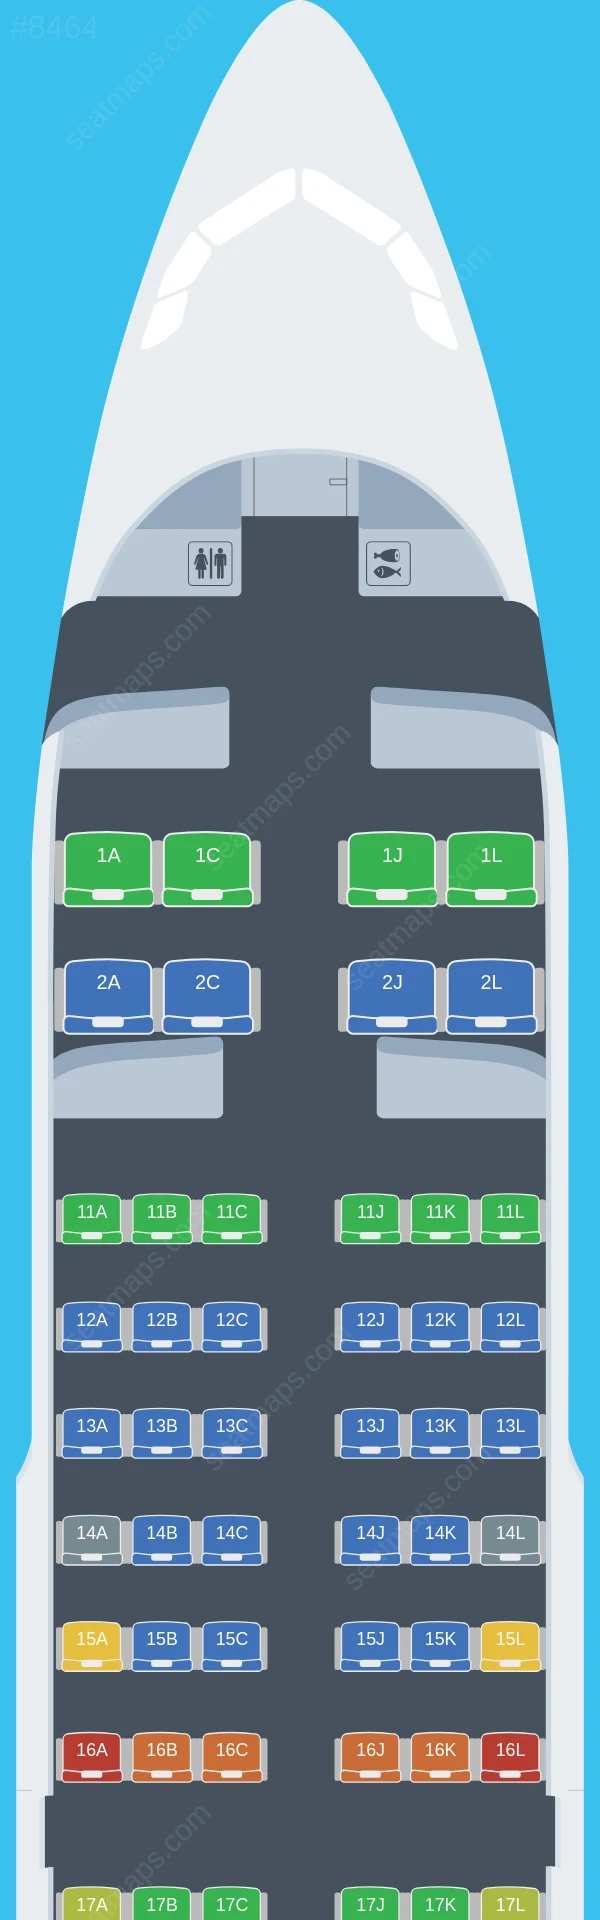 Chengdu Airlines Airbus A319-100 V.1 seatmap preview